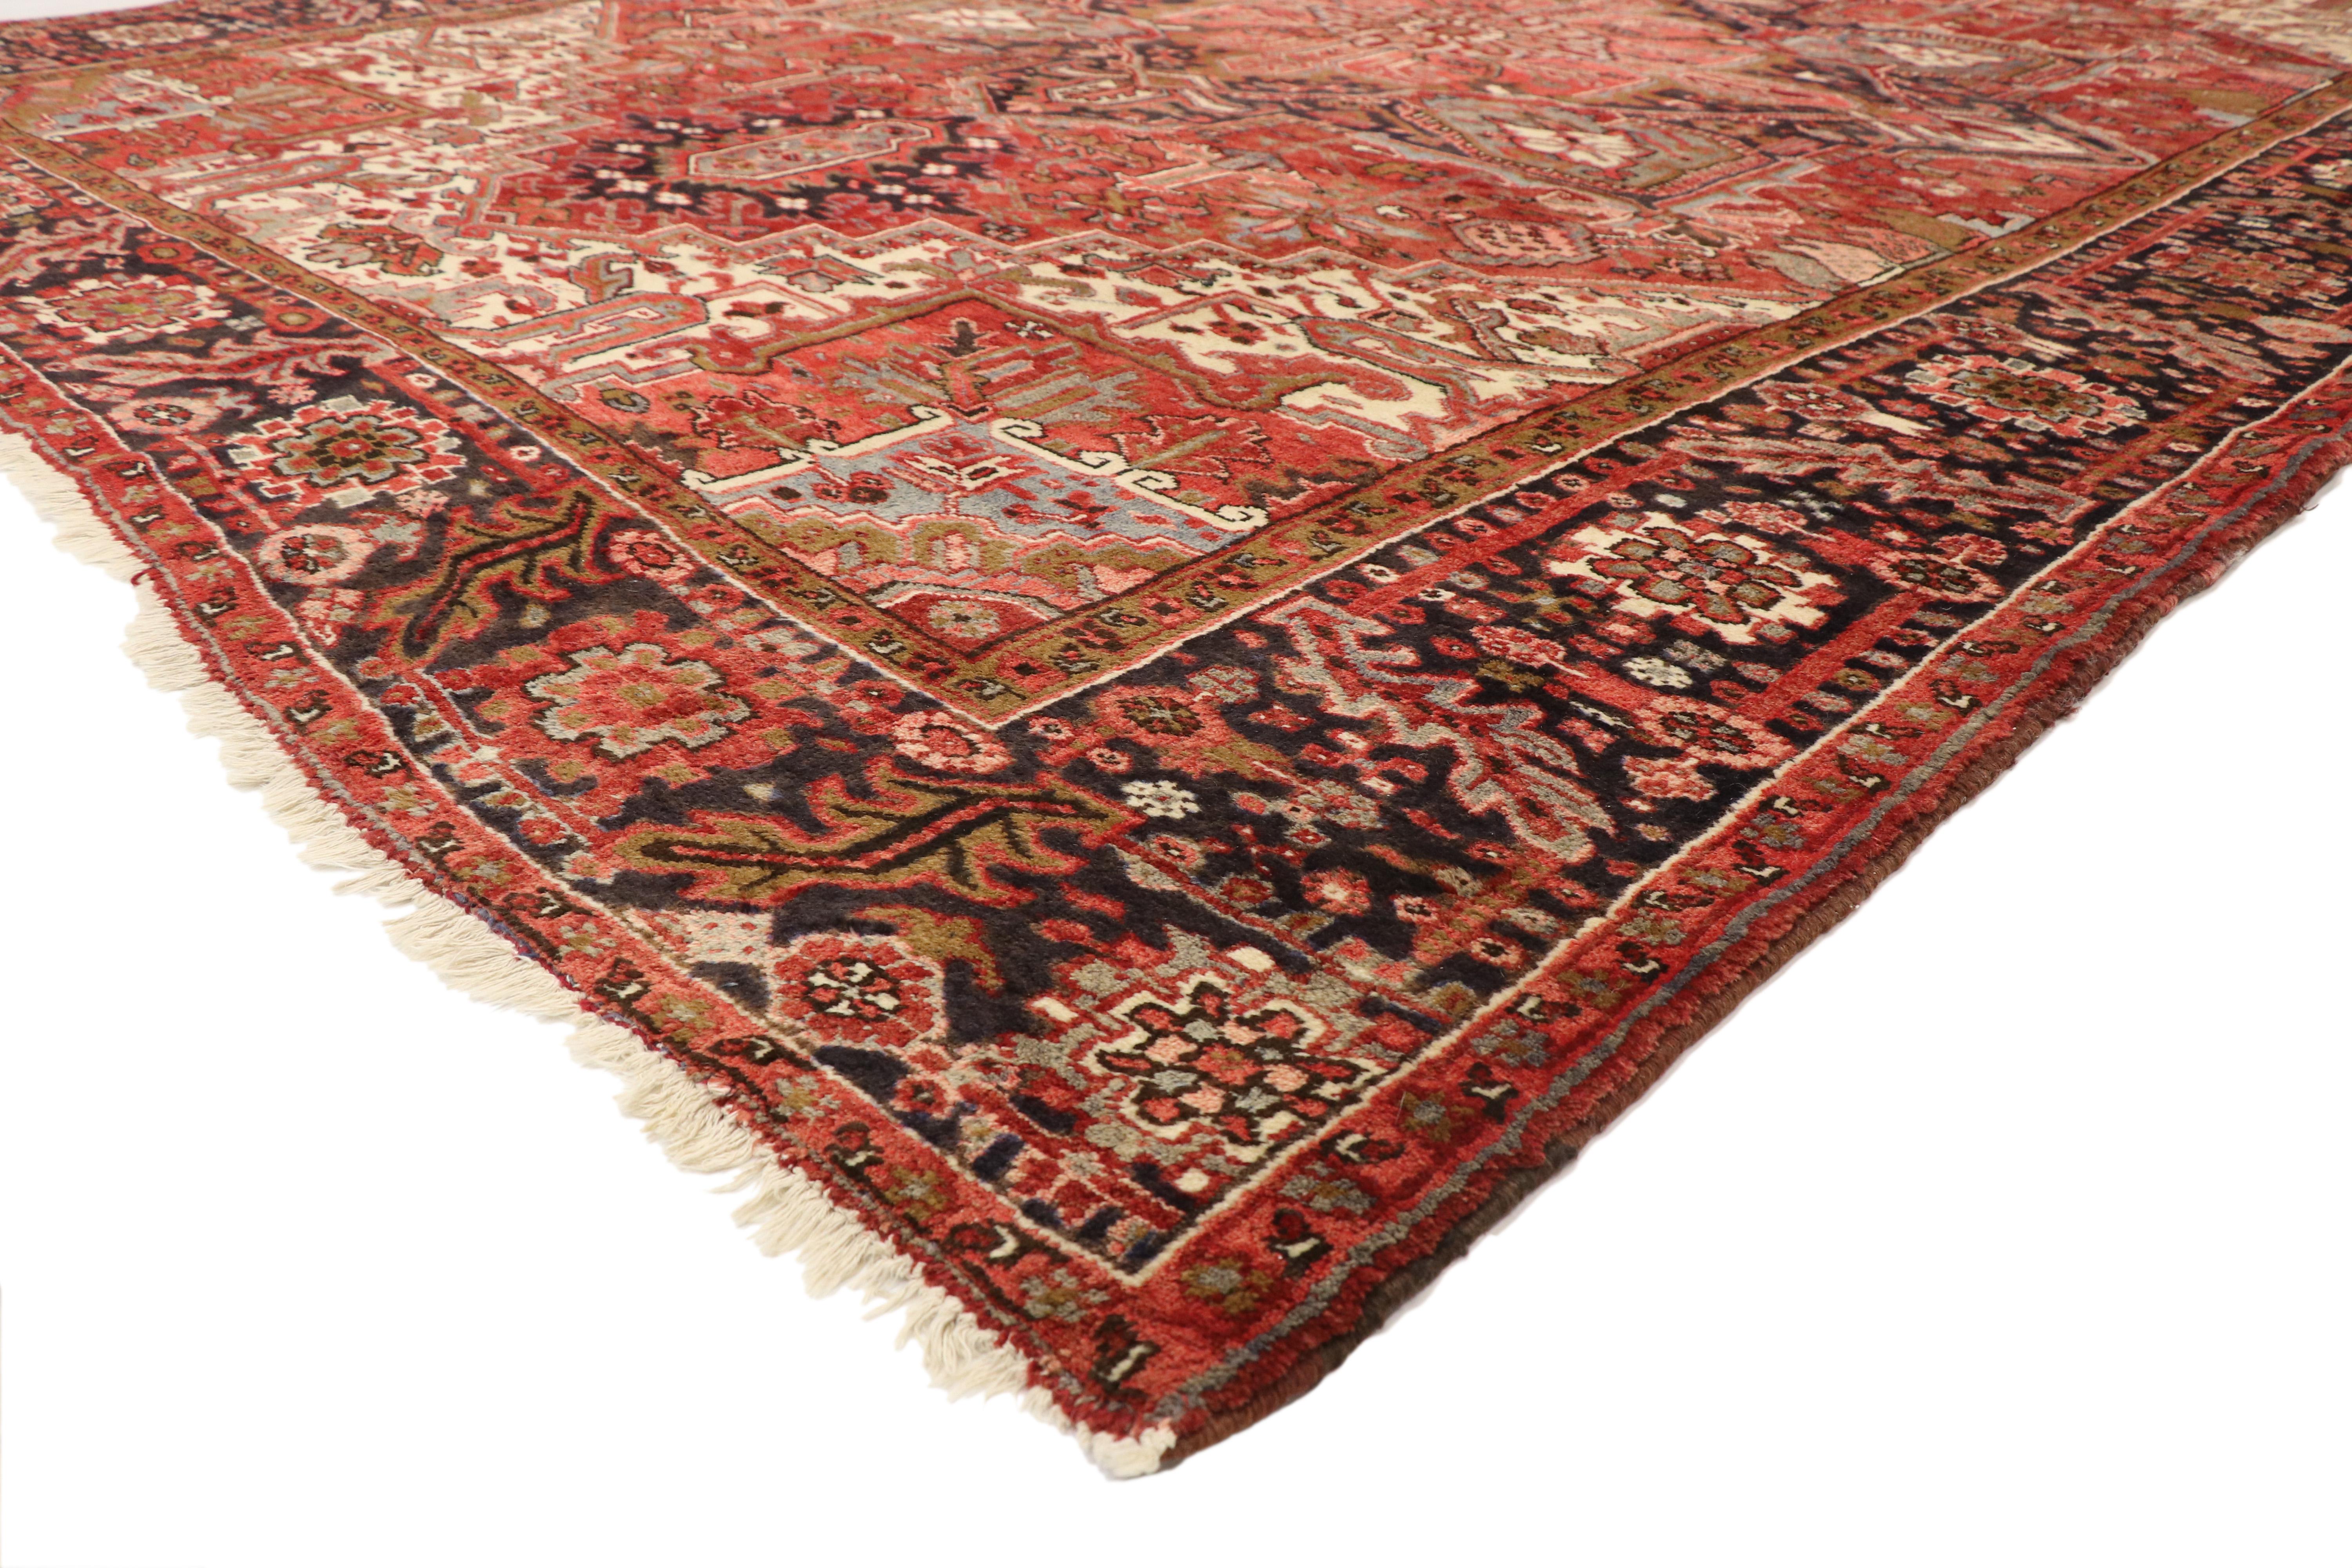 74970, vintage Persian Heriz rug with modern American craftsman style. Overflowing in a refined color palette and representing a stylish union of Modern American Craftsman style, this vintage Persian Heriz rug showcases classical elements of Persian